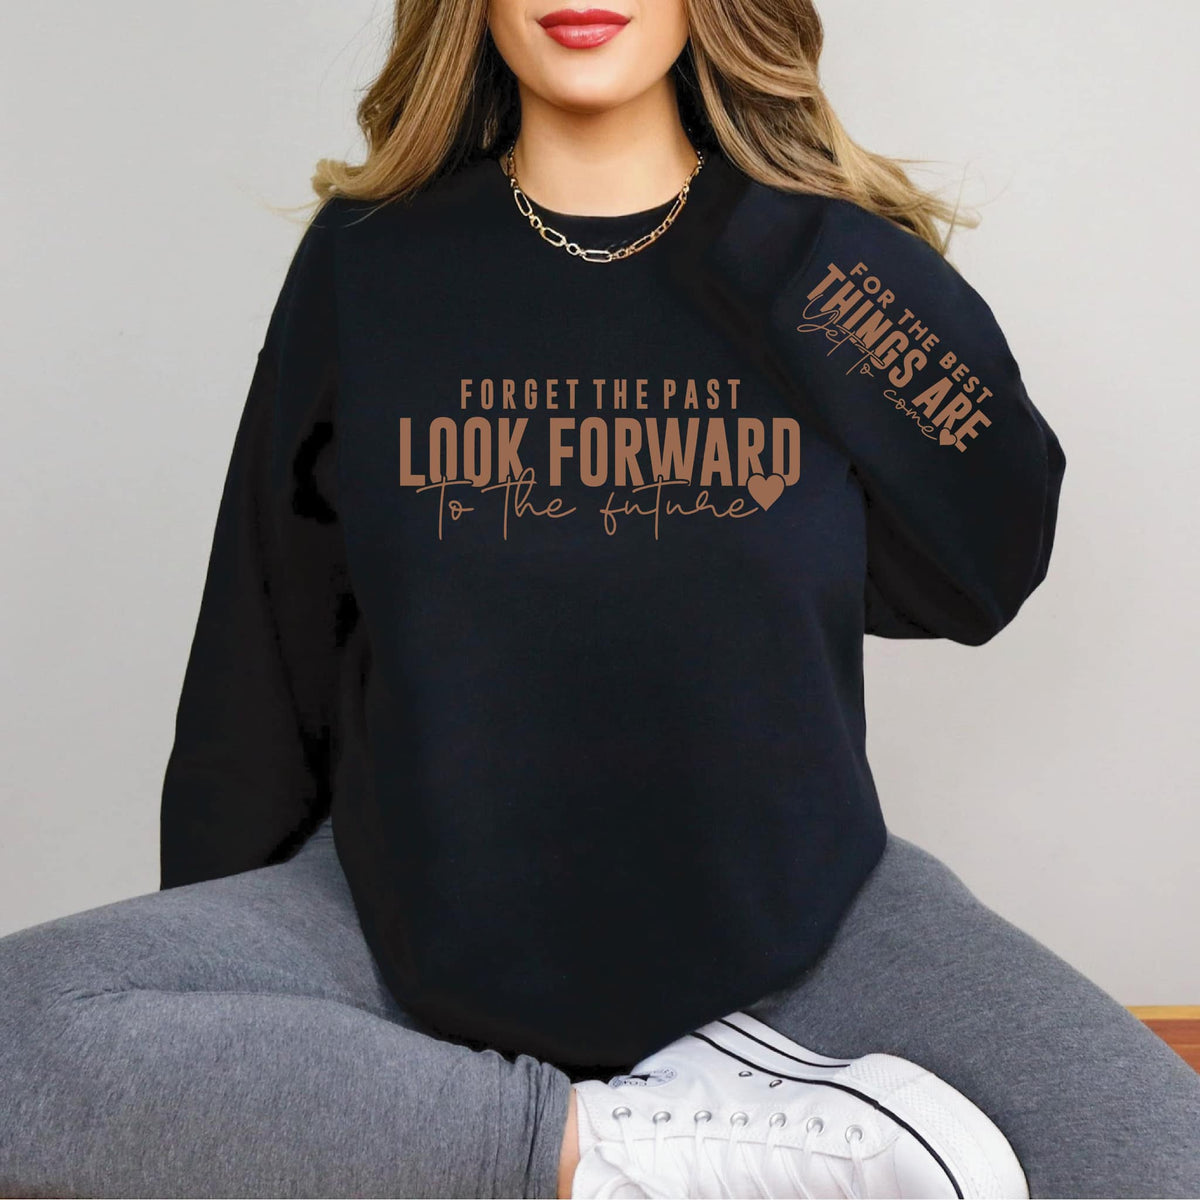 Look Forward With Sleeve Accent Sweatshirt -  ALLOW 7 DAYS TO SHIP + SHIP TIME